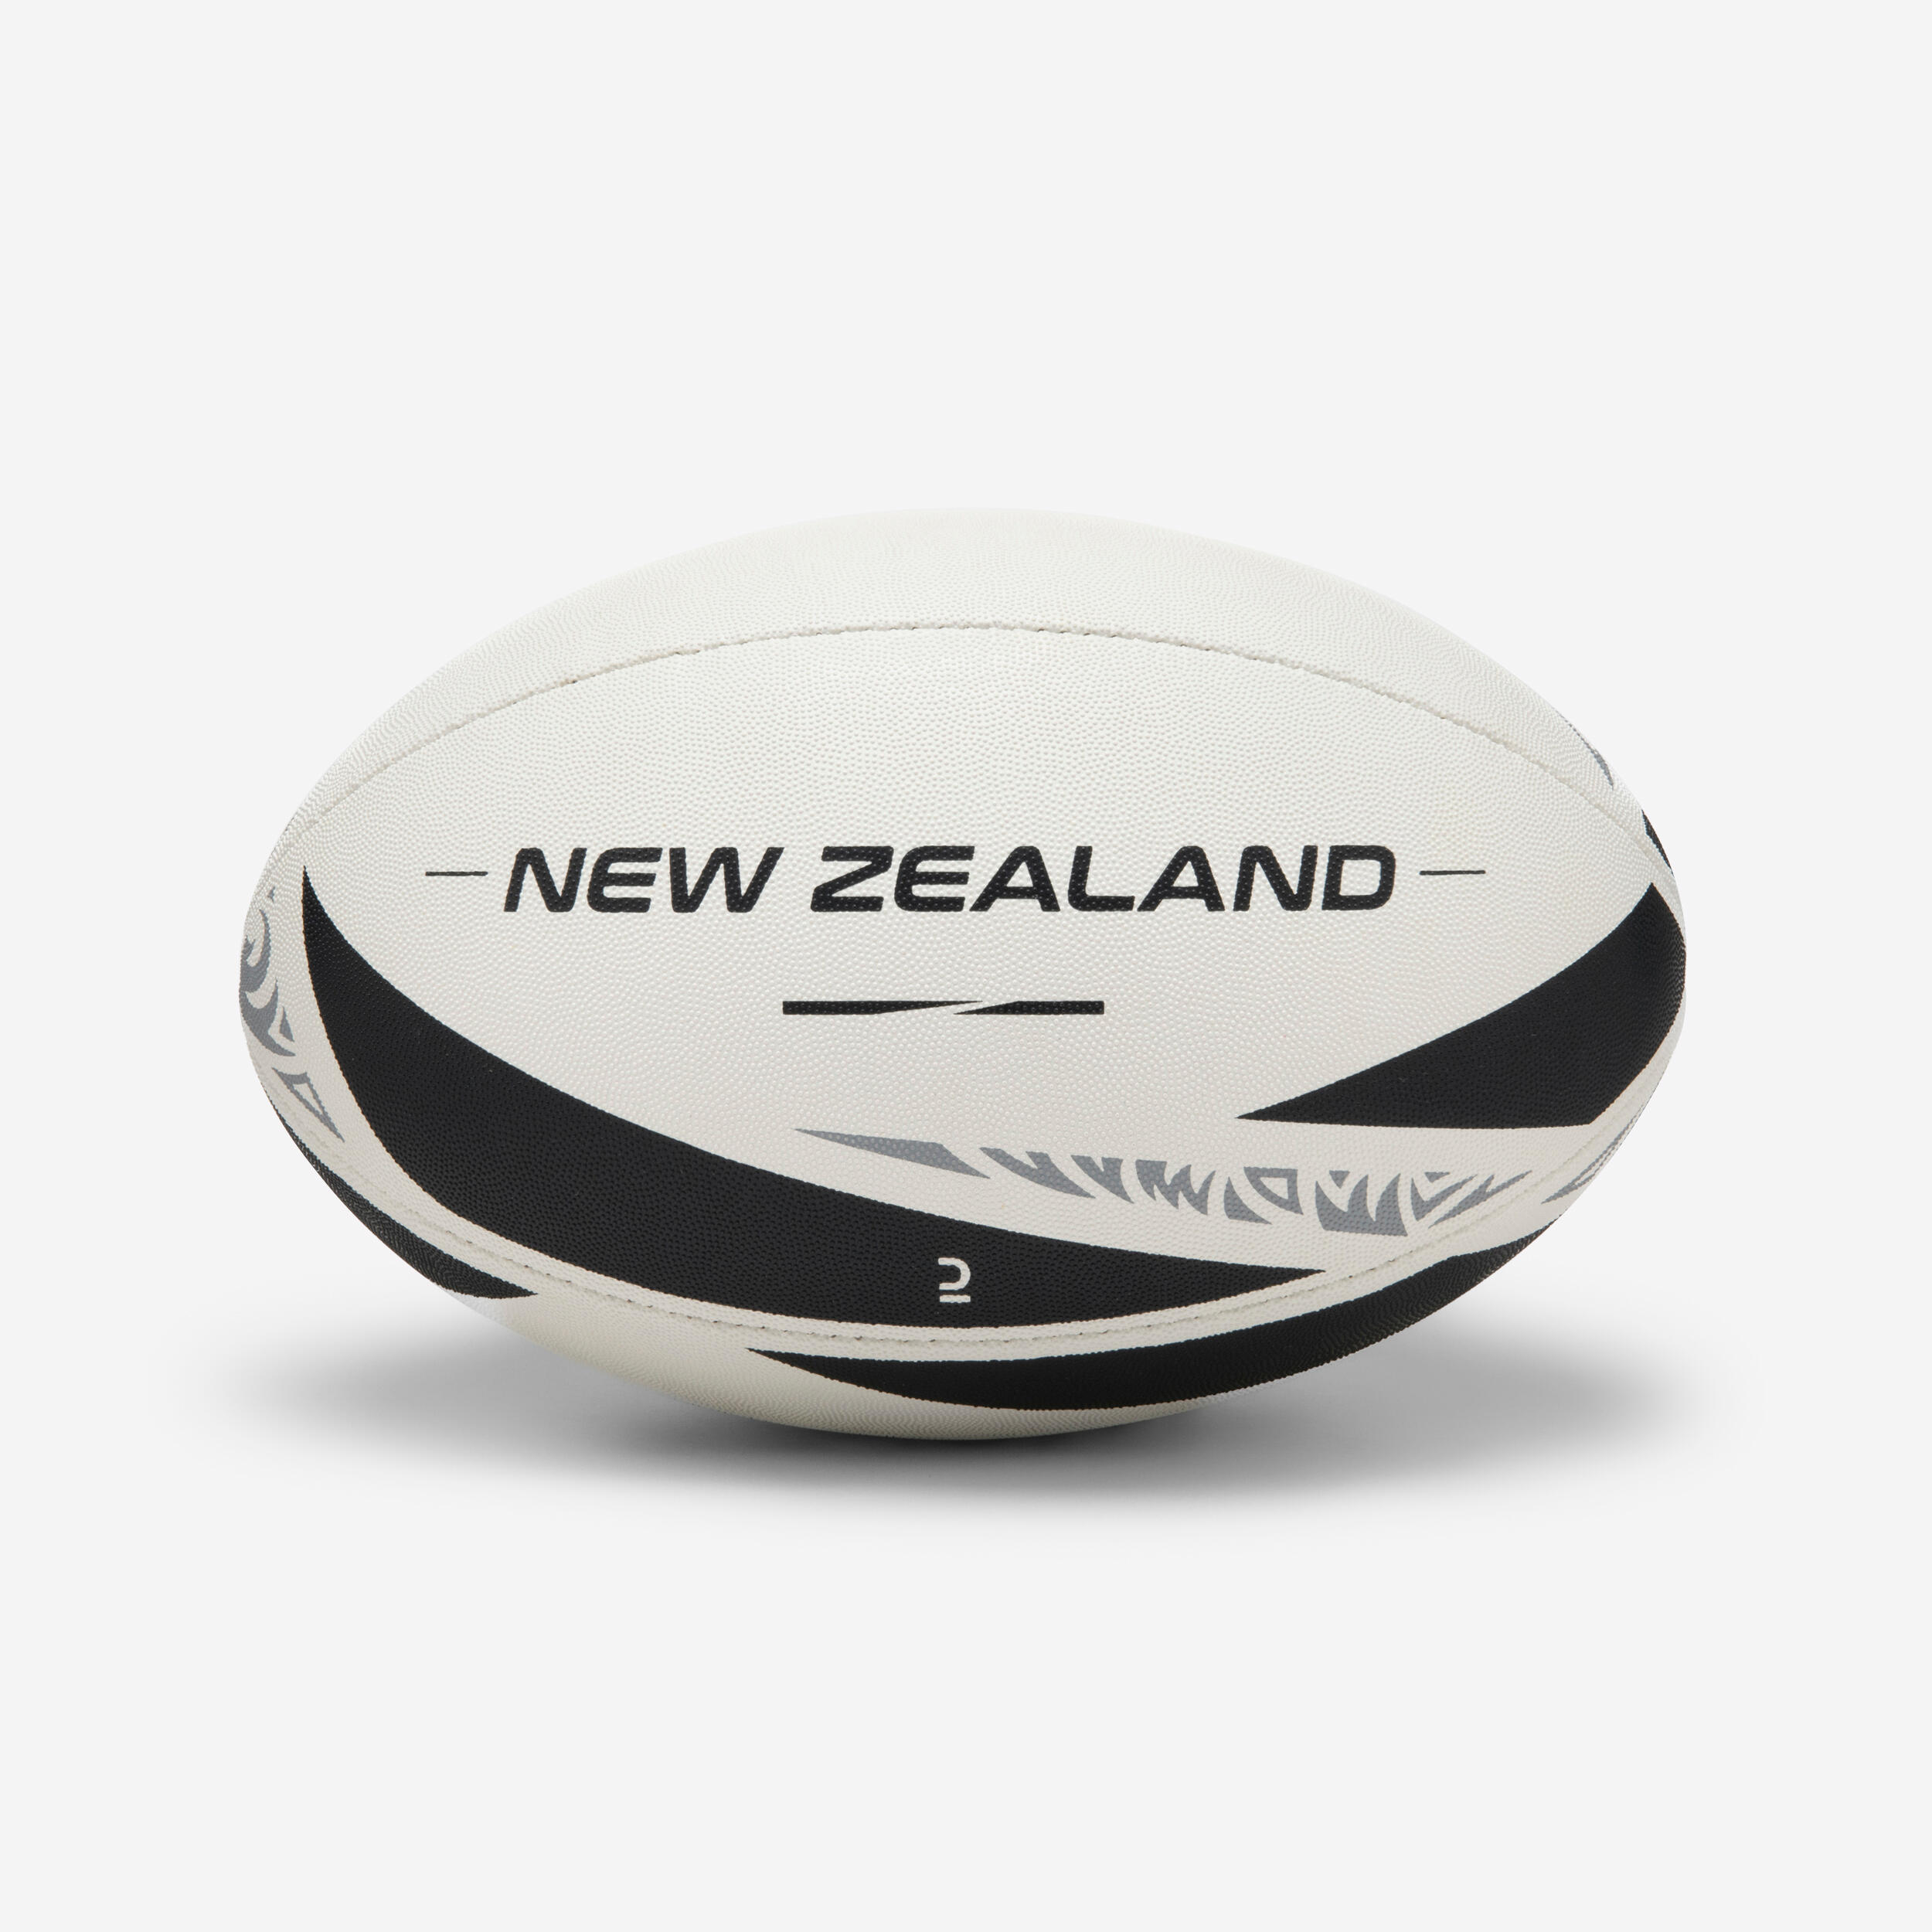 OFFLOAD Rugby Ball Size 5 - New Zealand